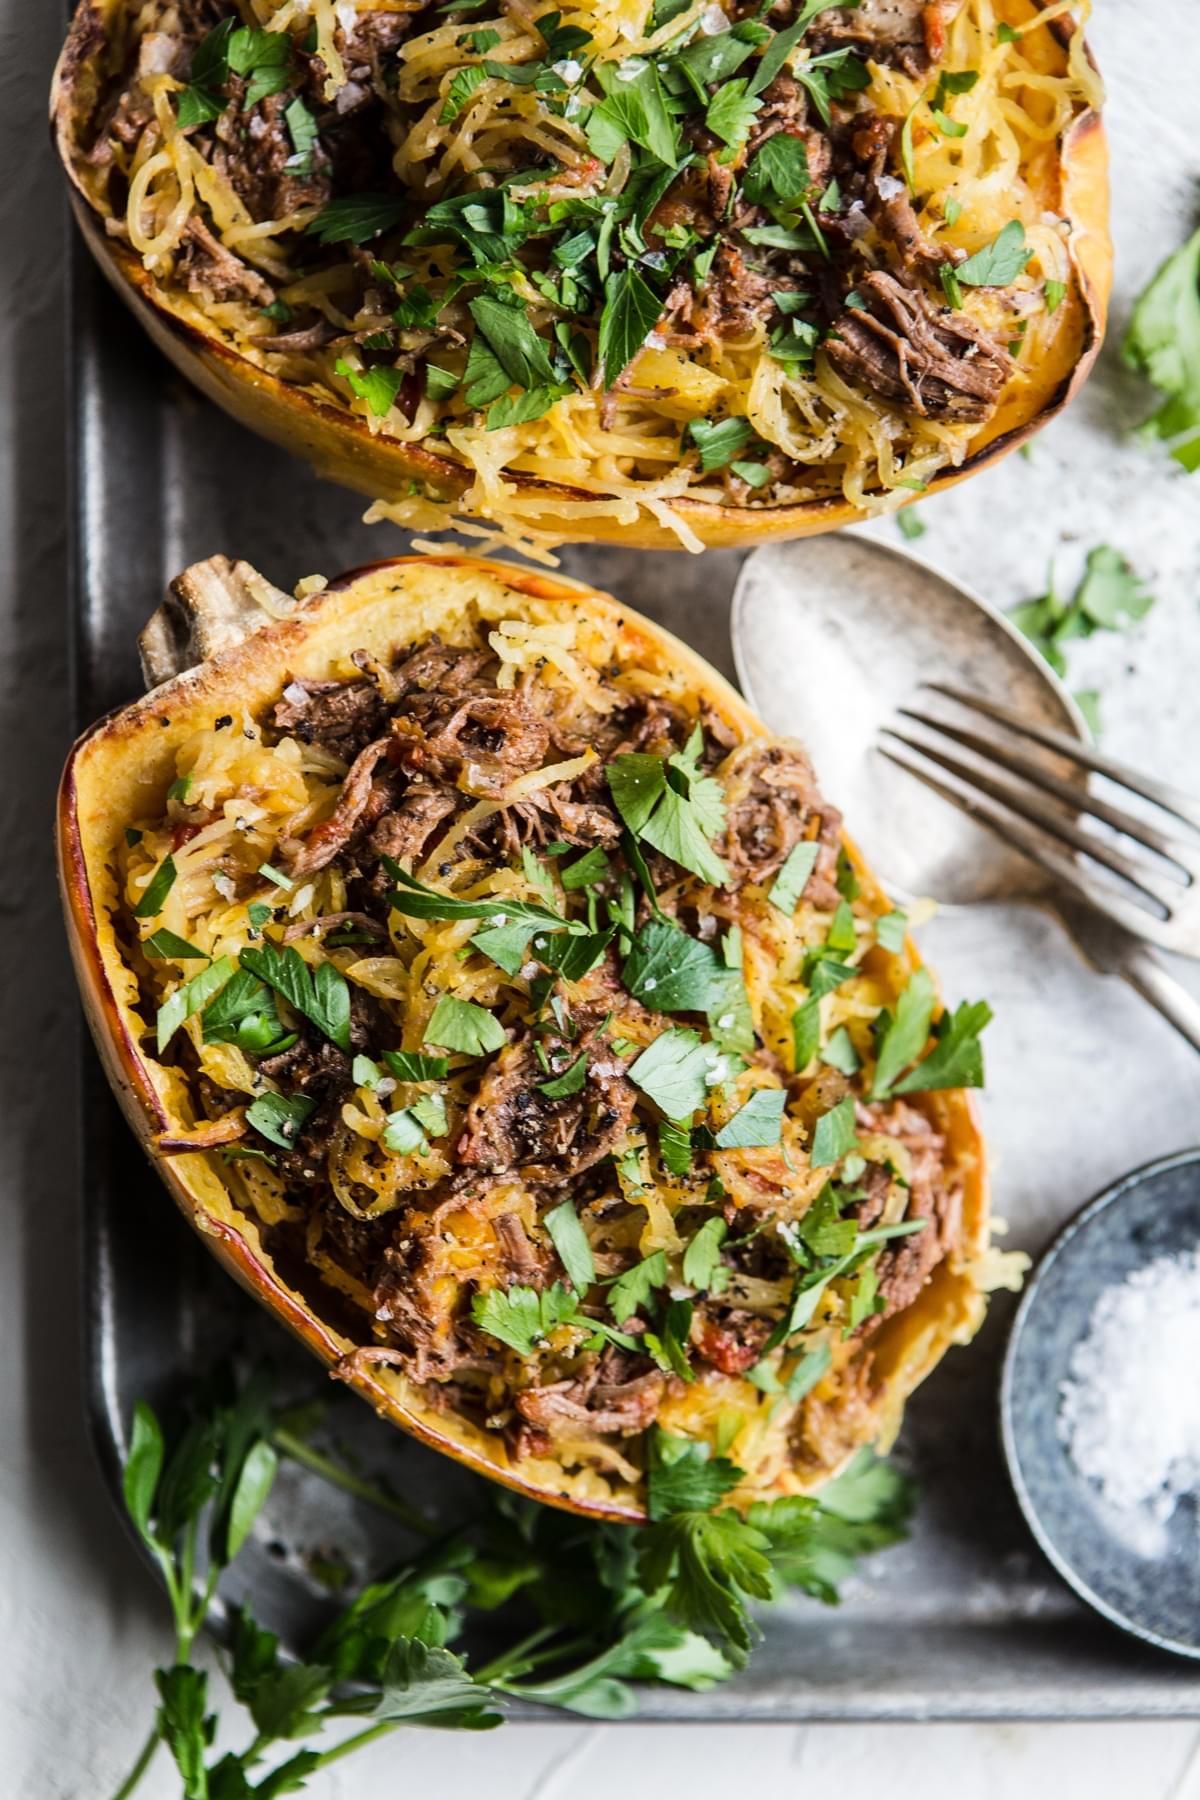 spaghetti squash cut in half topped with instant pot beef ragu